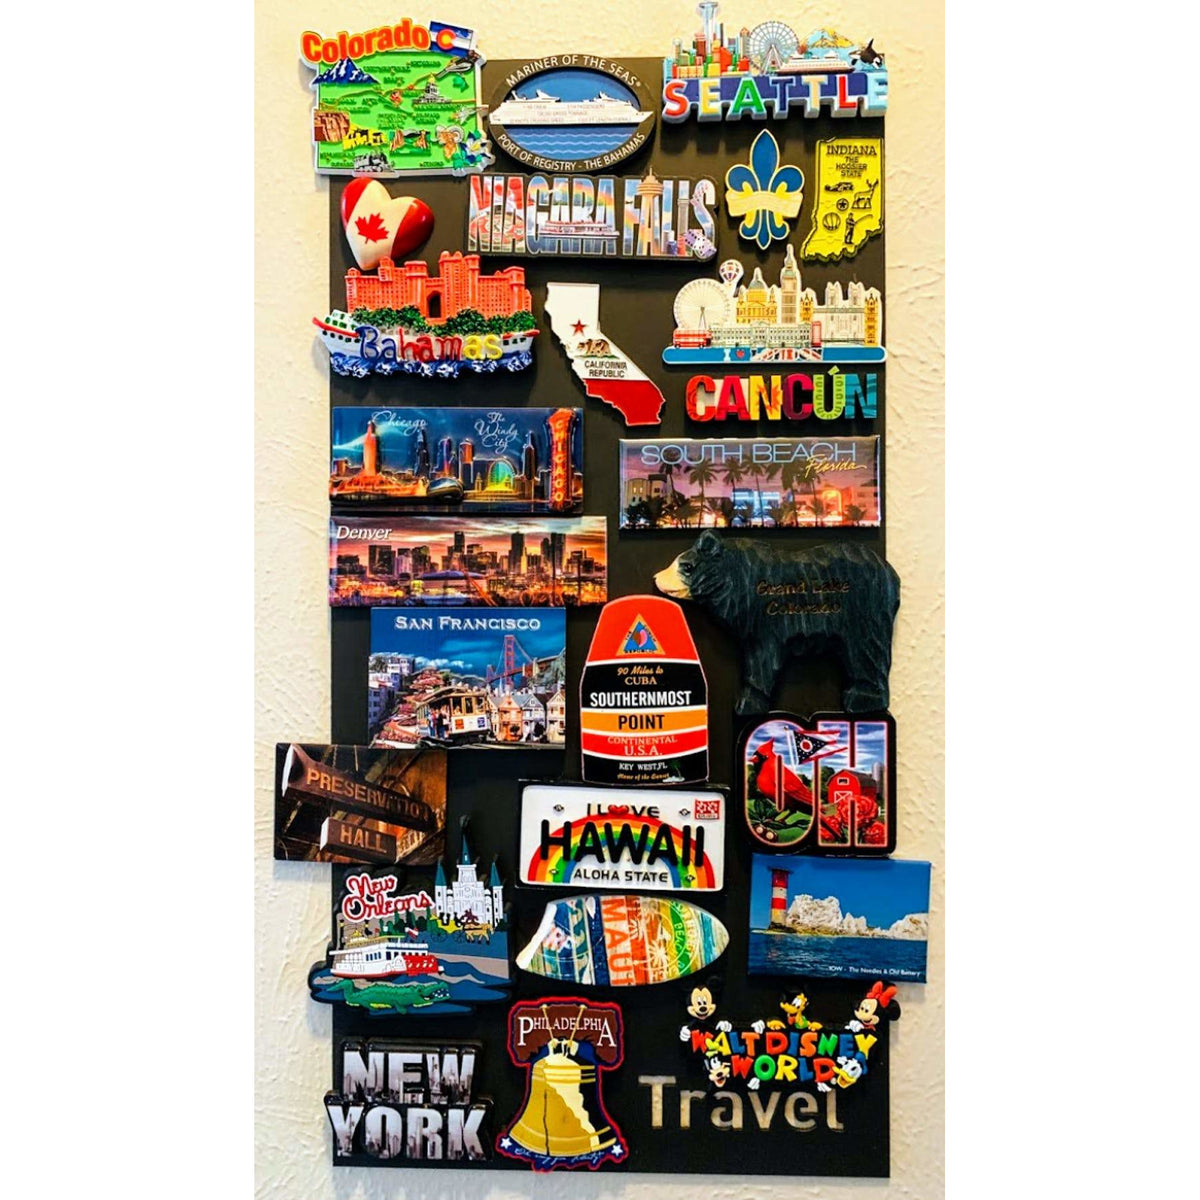 Choose Your Word Magnet Board - Travel | Love | Laugh | Adventures | $1205